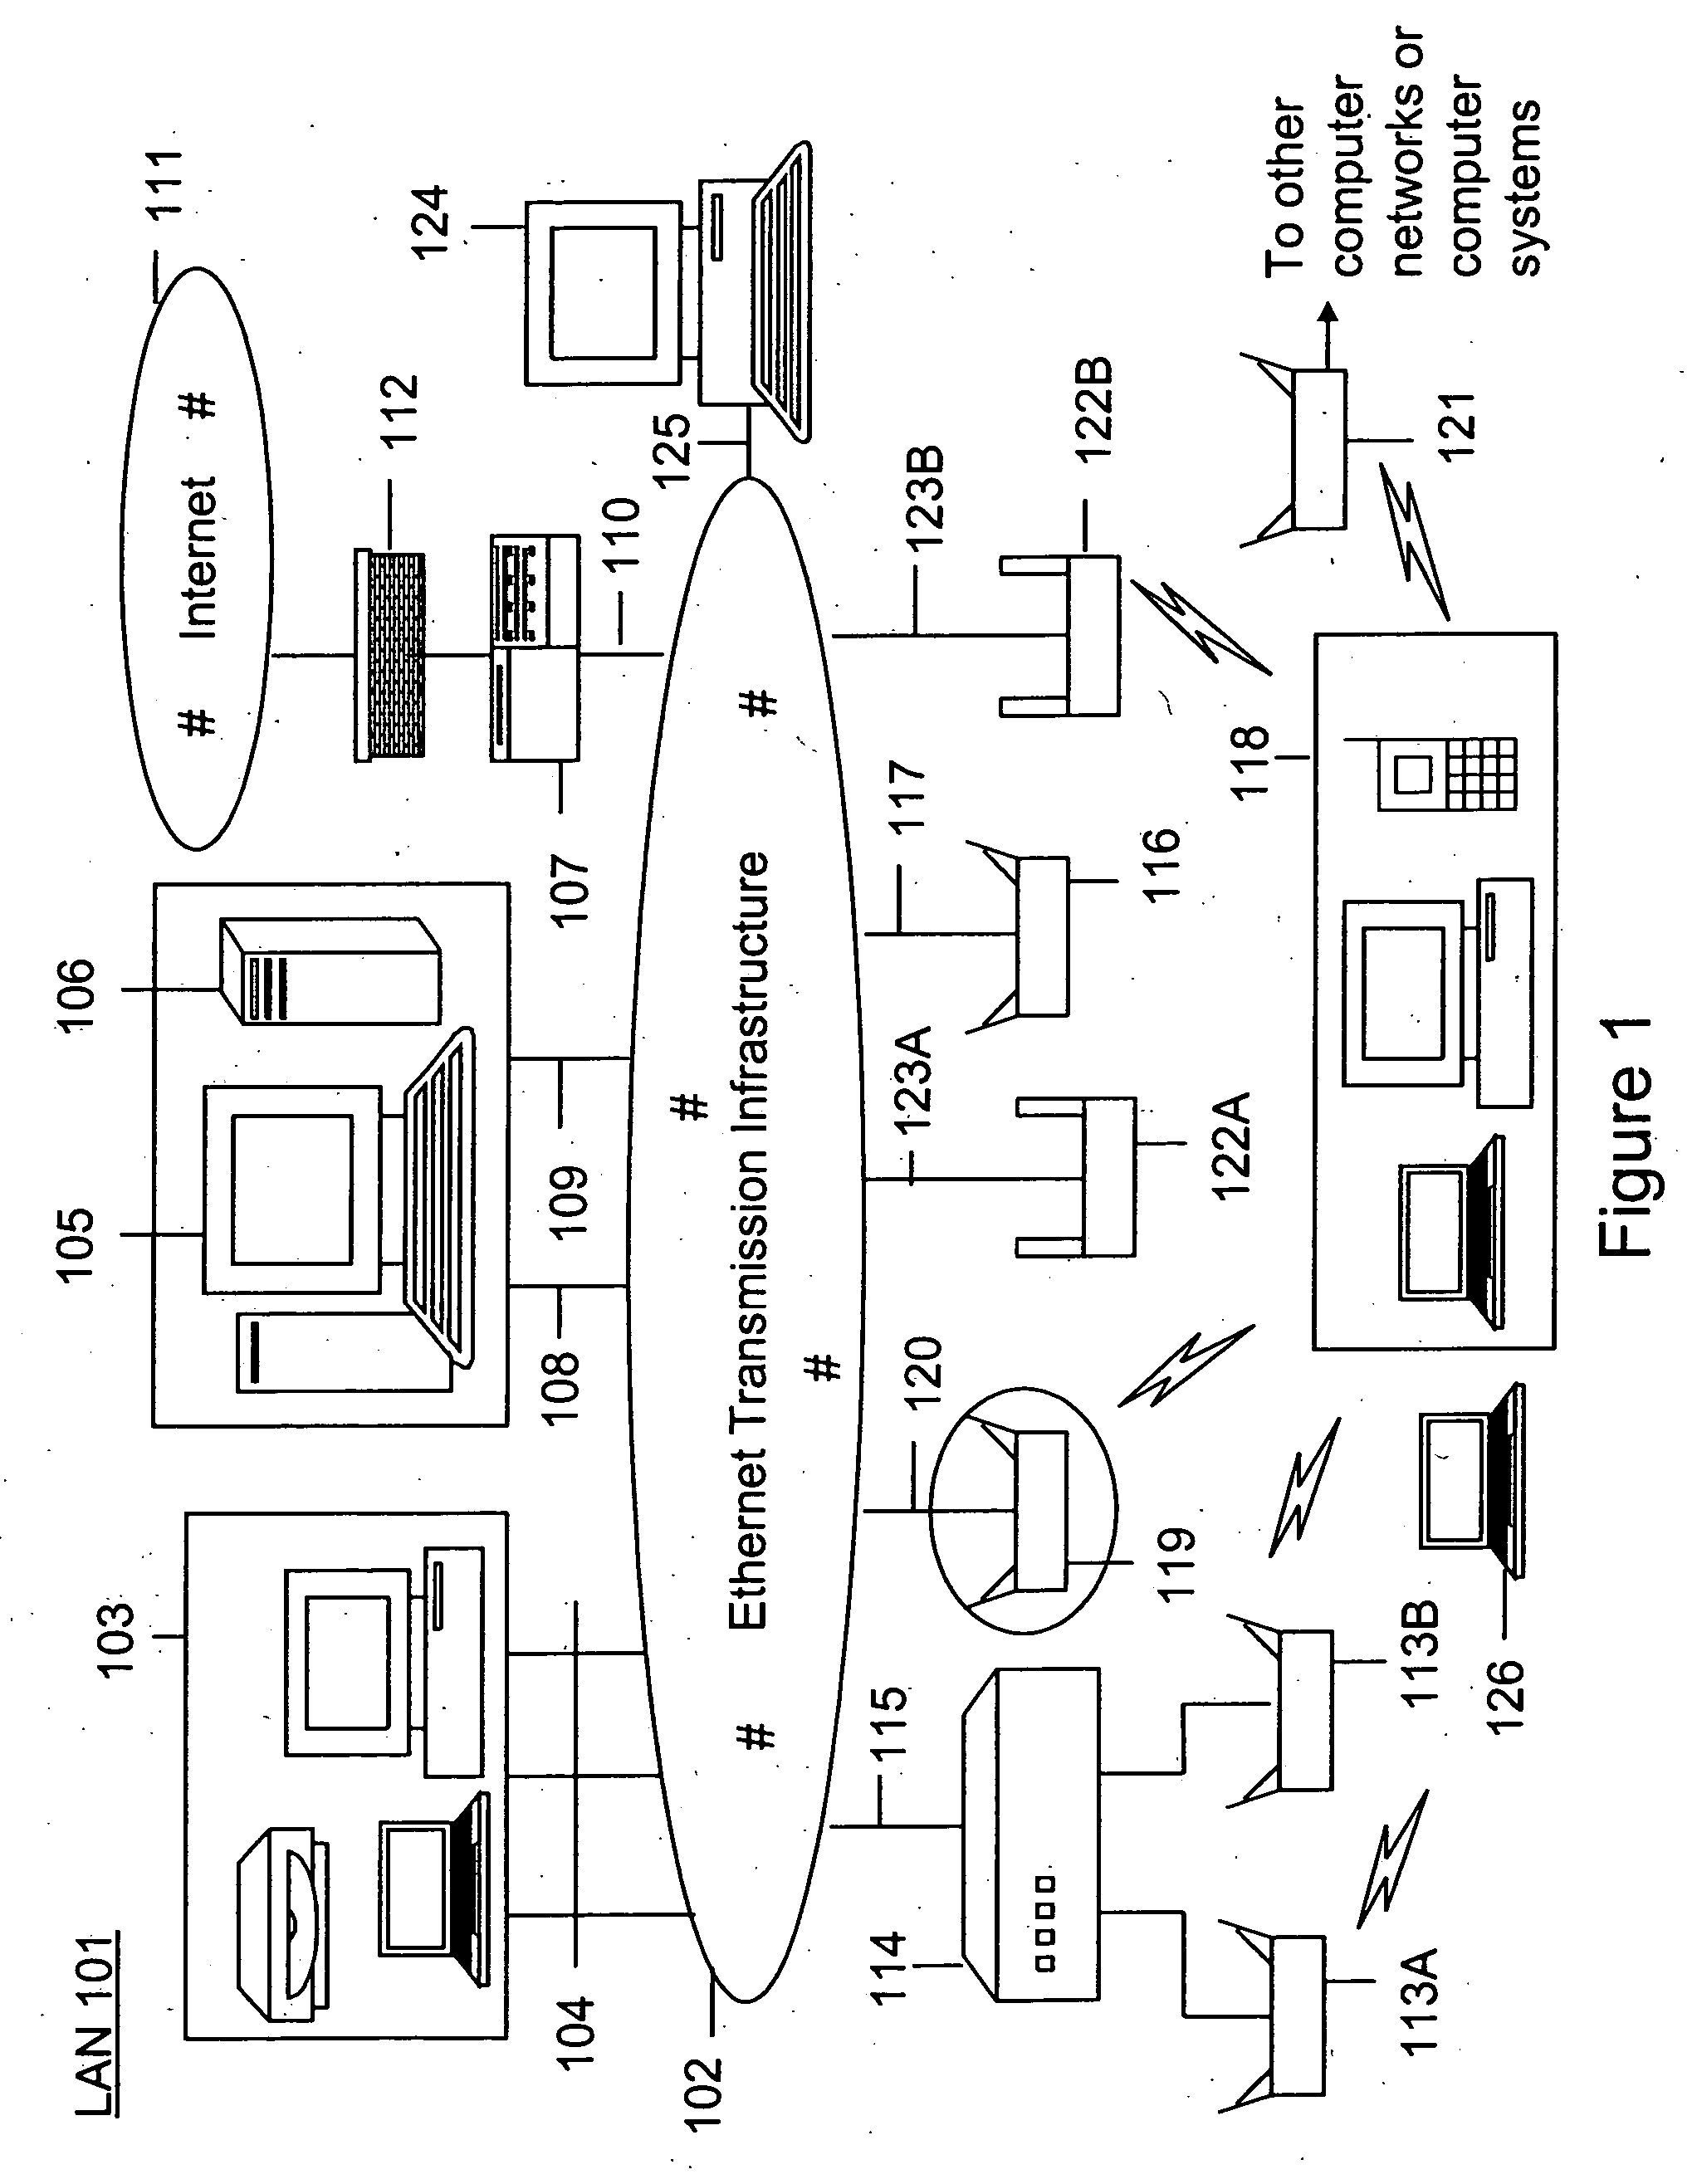 Method and apparatus for monitoring multiple network segments in local area networks for compliance with wireless security policy